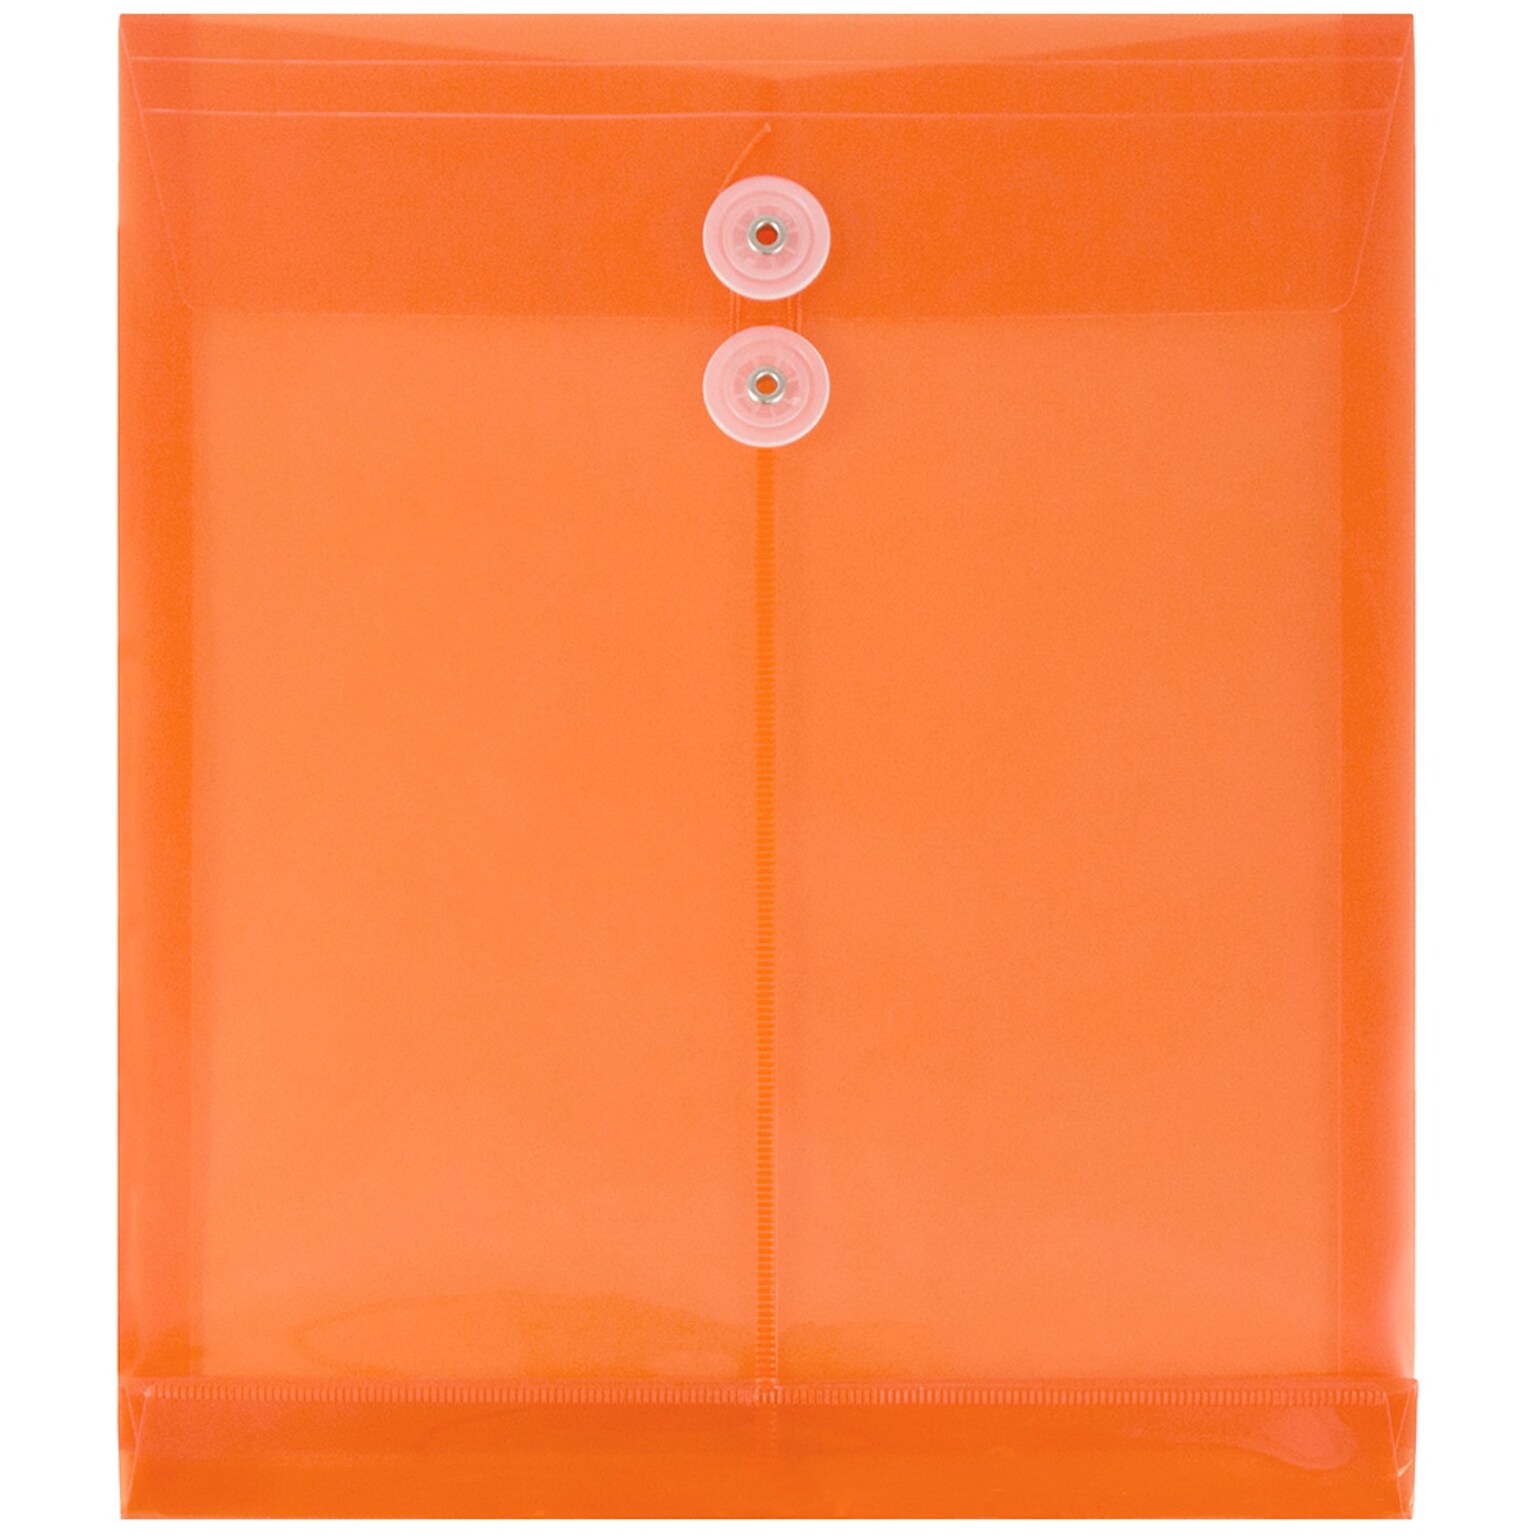 JAM Paper® Plastic Envelopes with Button and String Tie Closure, Letter Open End, 9.75 x 11.75, Bright Orange, 12/Pack (118B1OR)